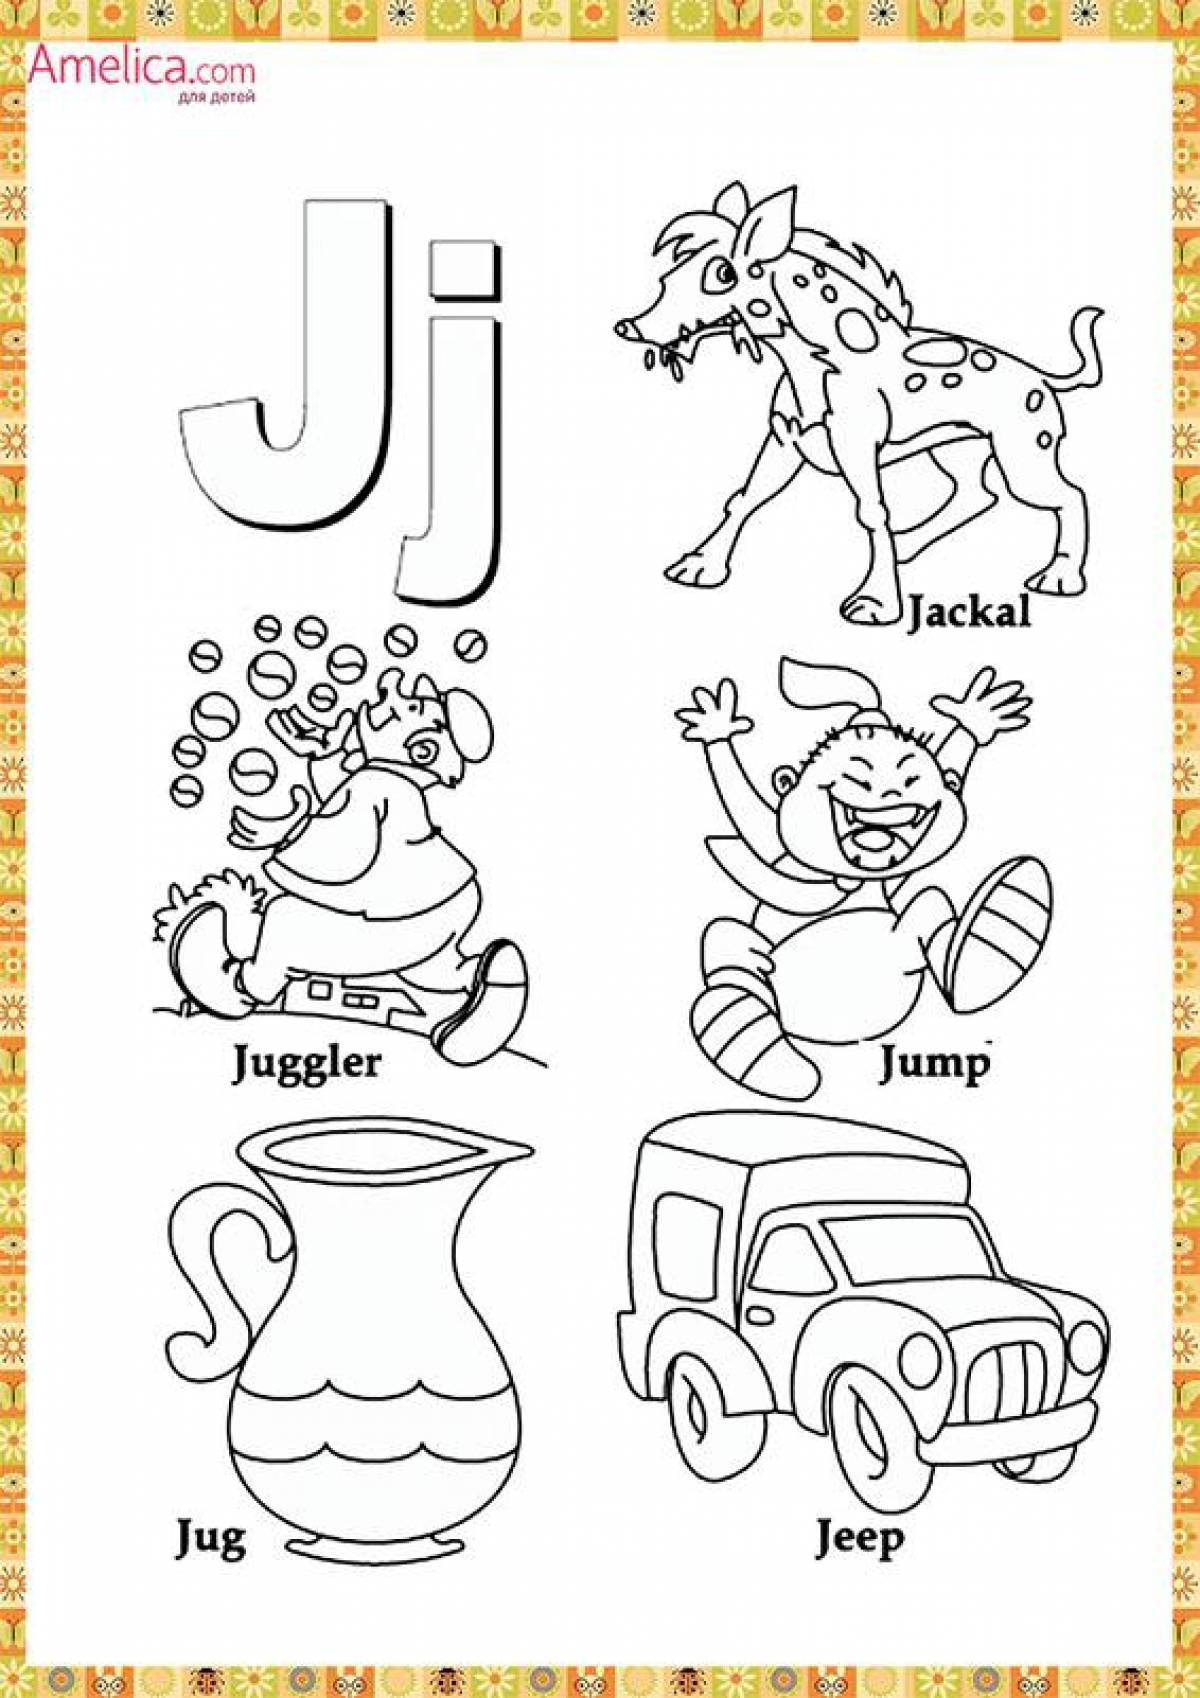 Colour coloring of the English alphabet for children